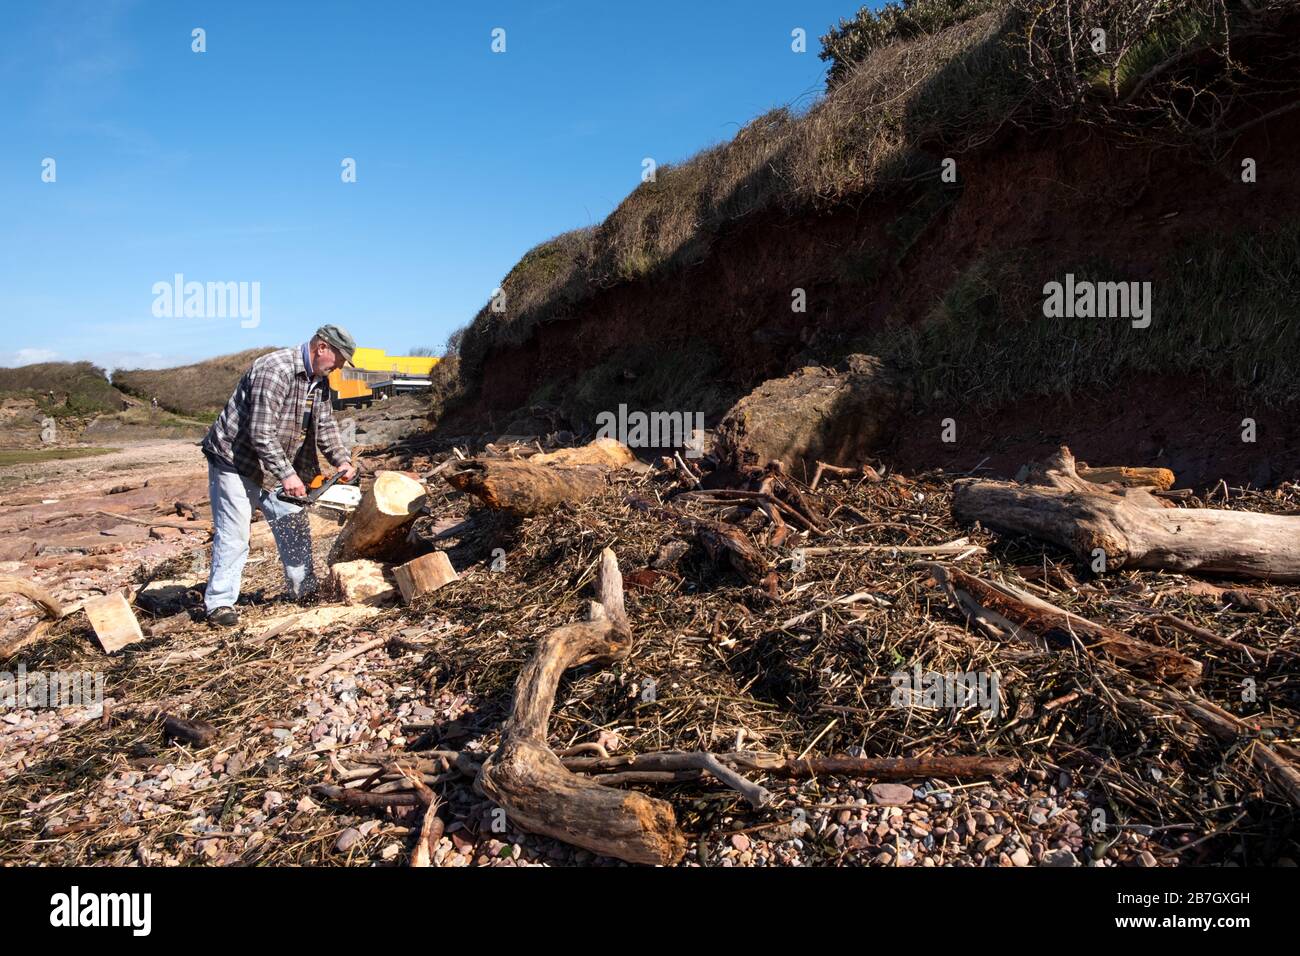 An opportunist using a chain saw to saw a washed up tree trunk on a beach. the wood is being cut into a manageable size to carry away for fire wood. Stock Photo